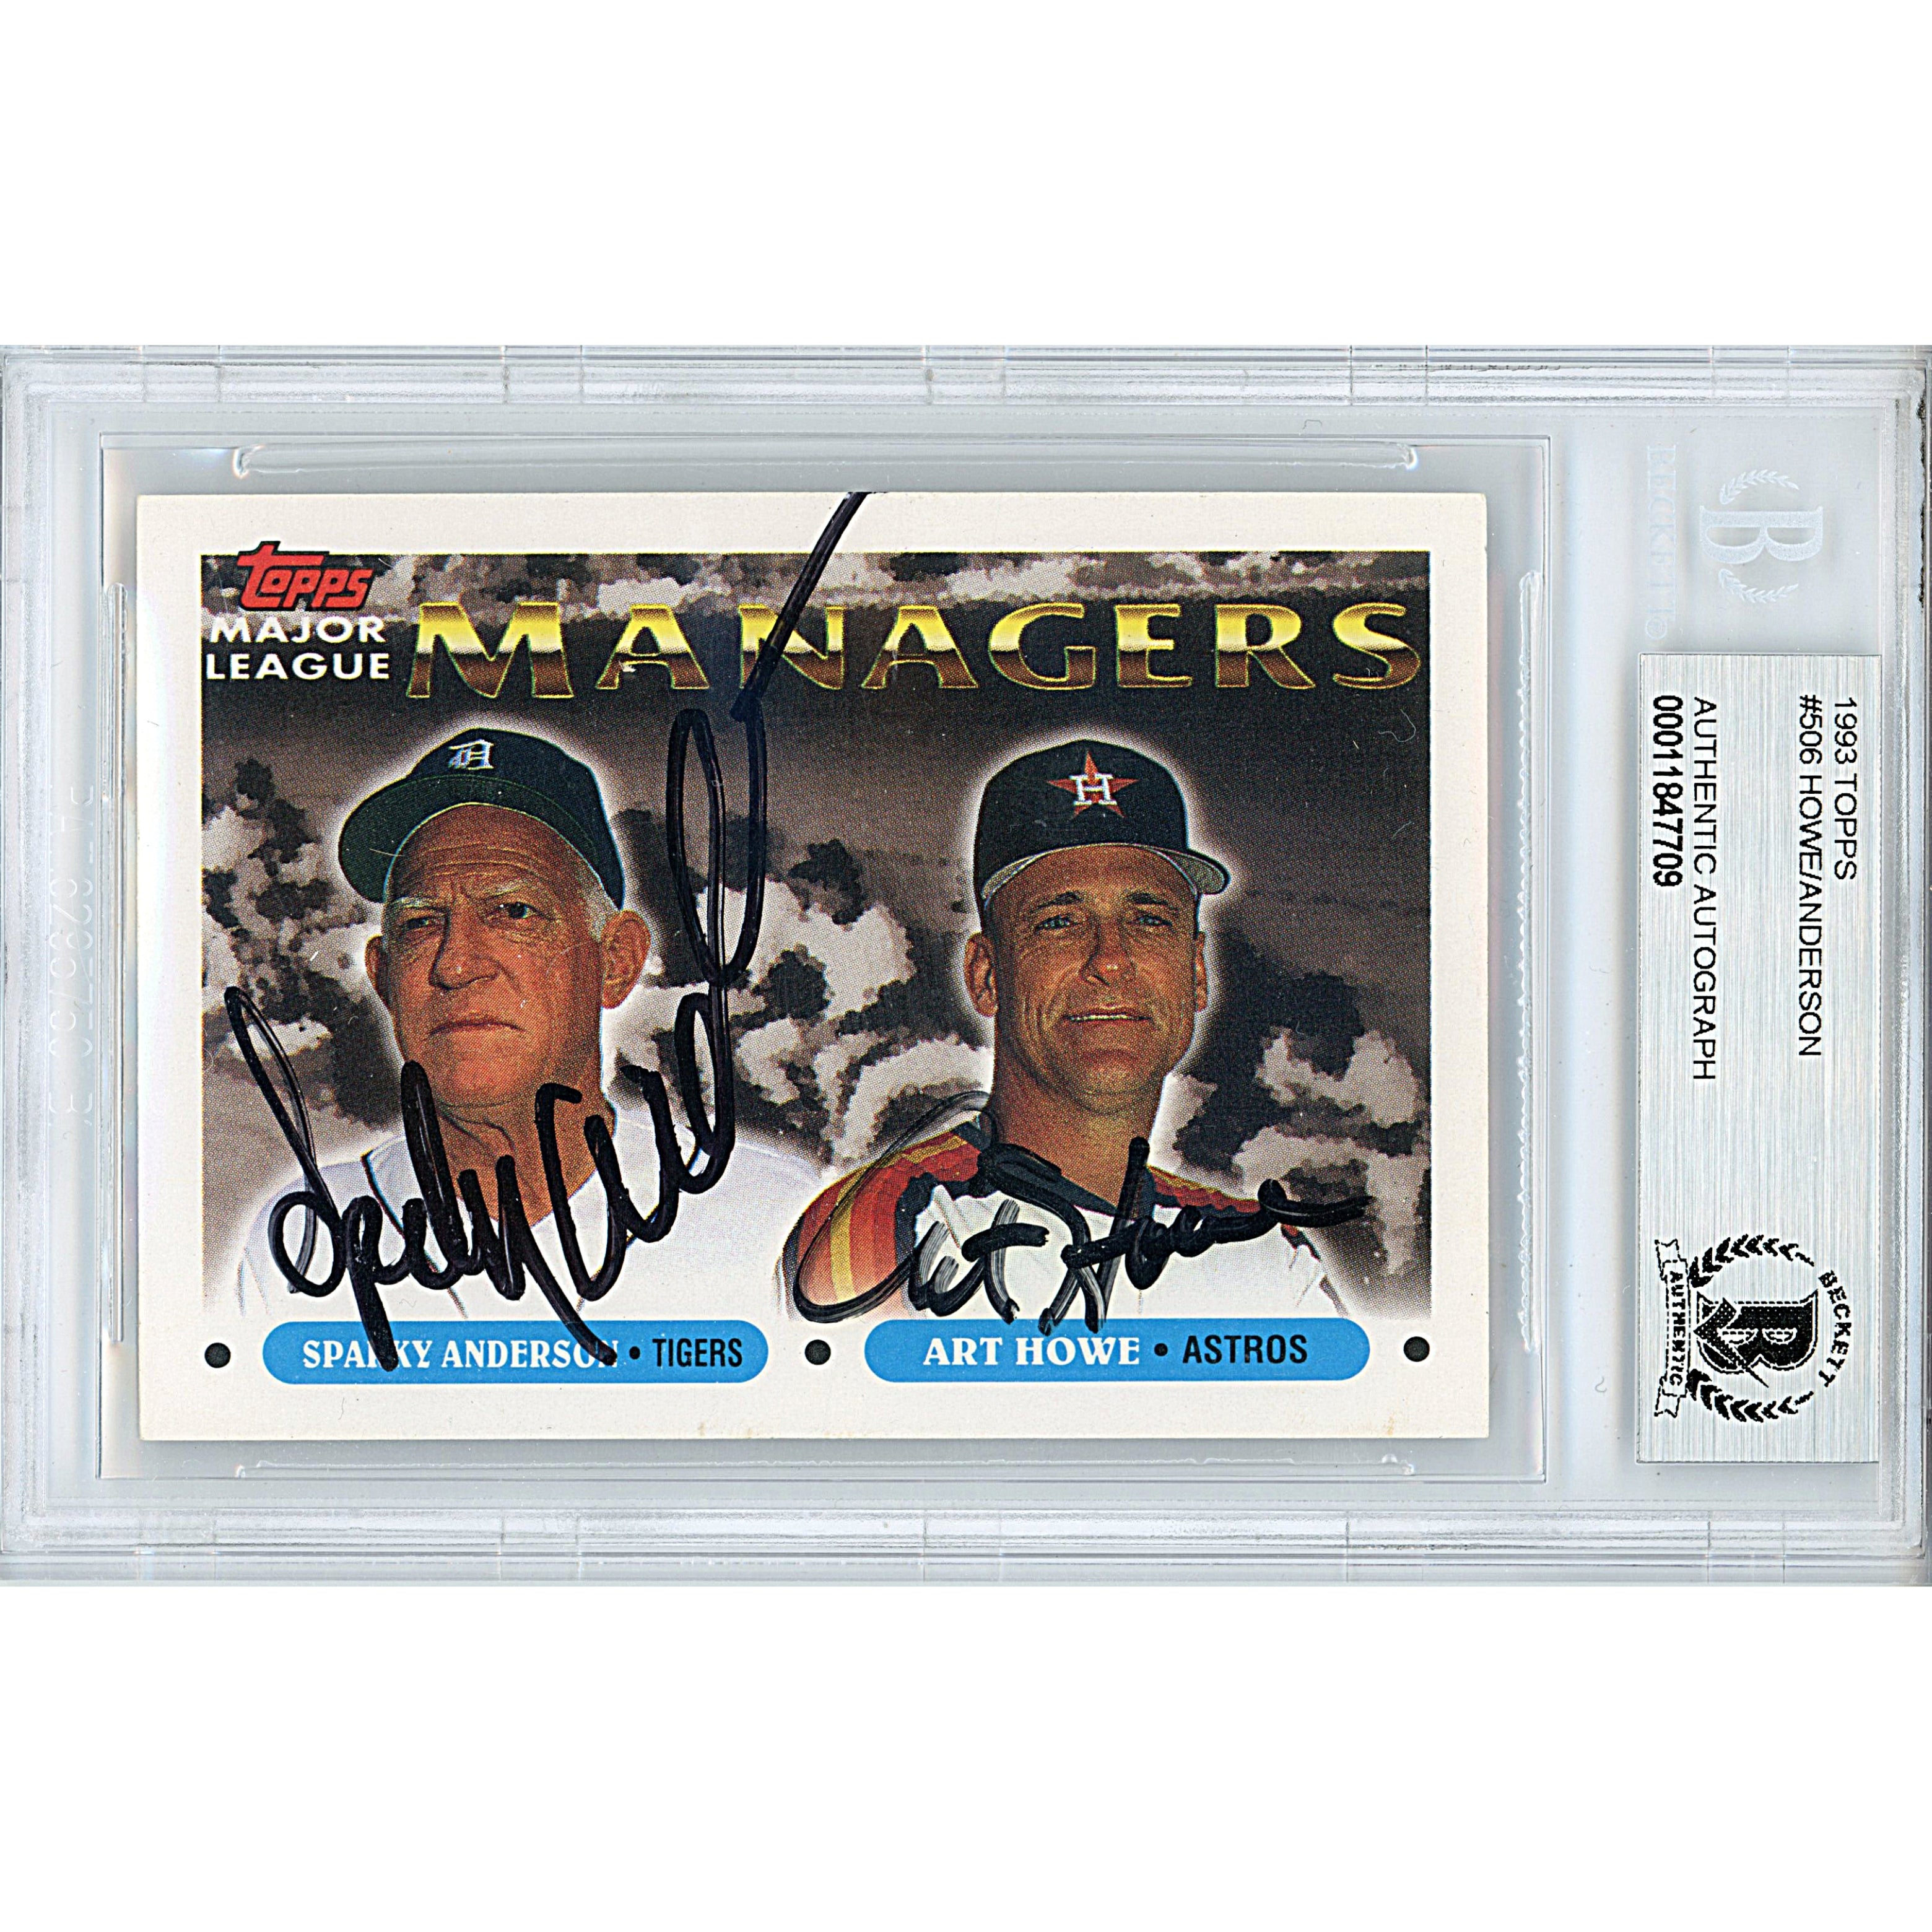 Top Sparky Anderson Cards, Rookies, Autographs